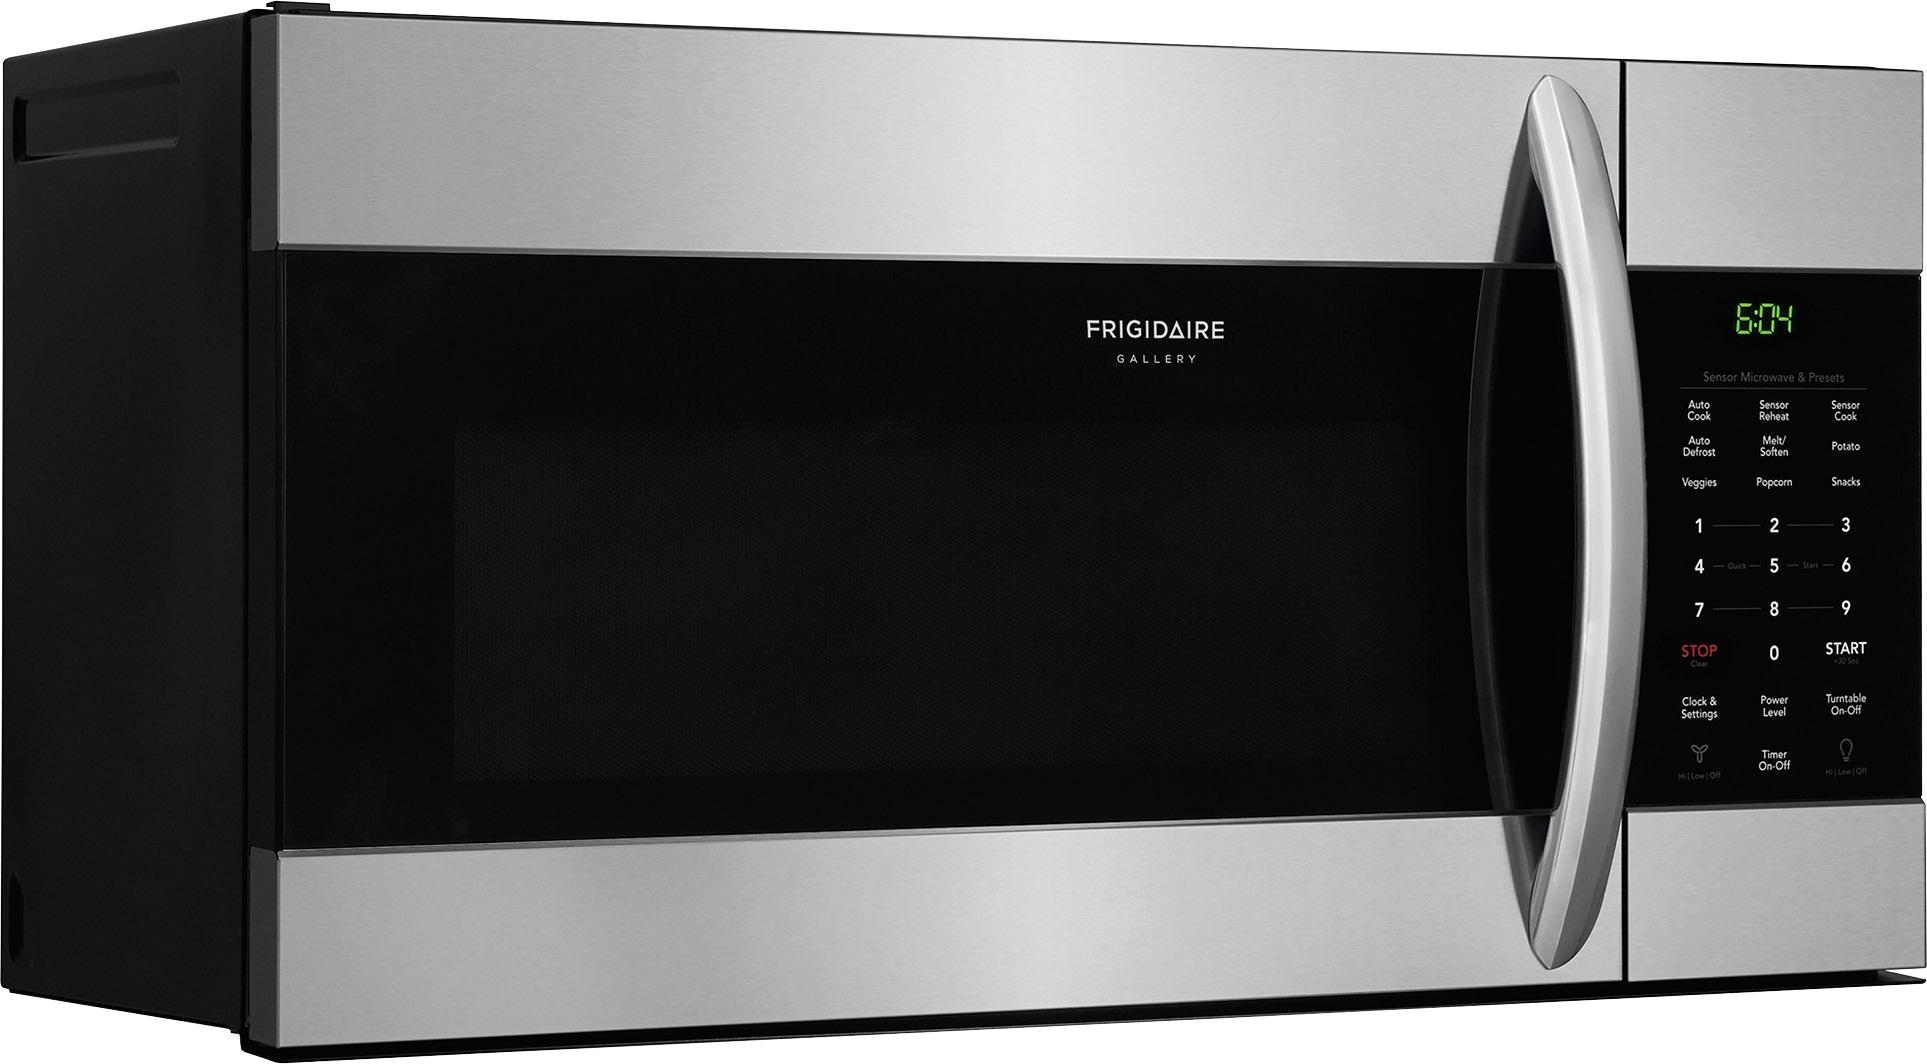 Questions and Answers: Frigidaire Gallery 1.7 Cu. Ft. Over-the-Range